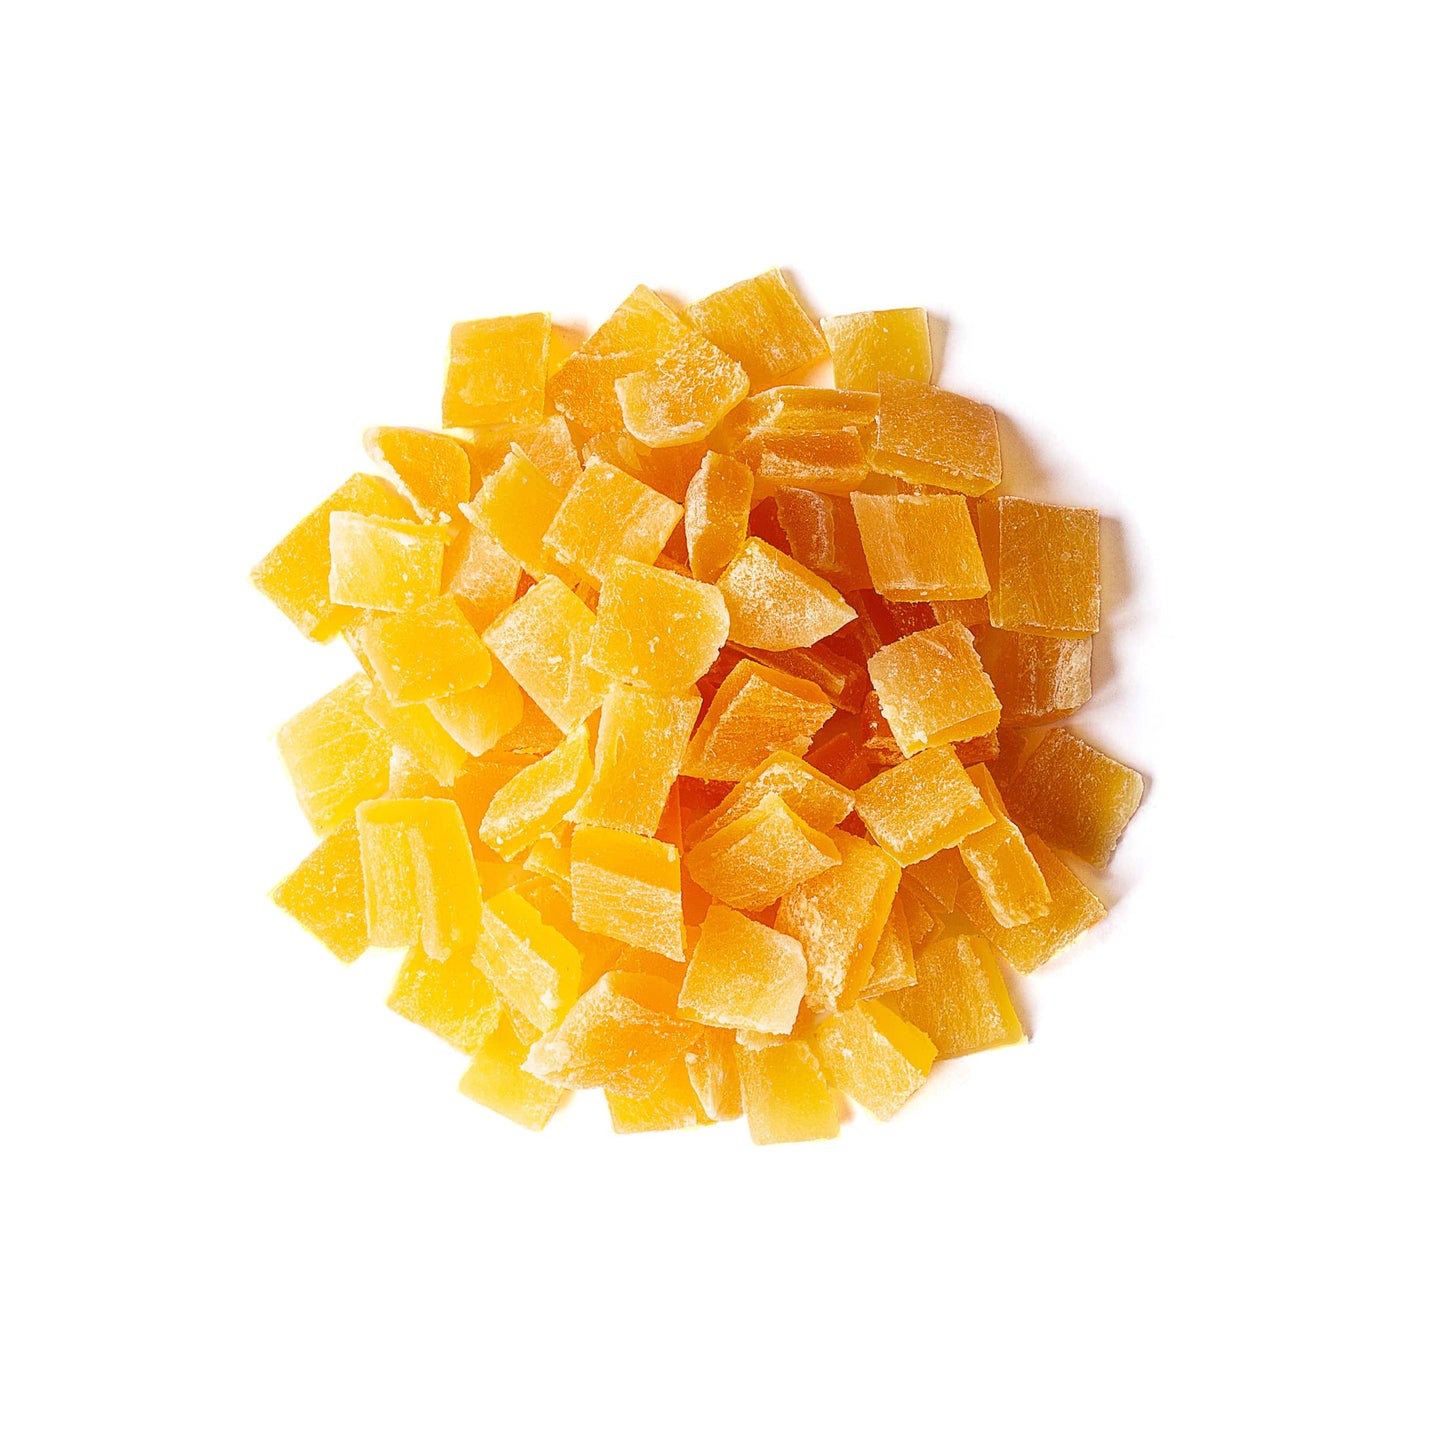 Dried Diced Mango - Sweetened, Unsulfured, Sulfite Free Chunks, No Added Color, No Artificial Flavors, Kosher Tropical Fruit, Vegan, Bulk, Great for Culinary Use and Baking